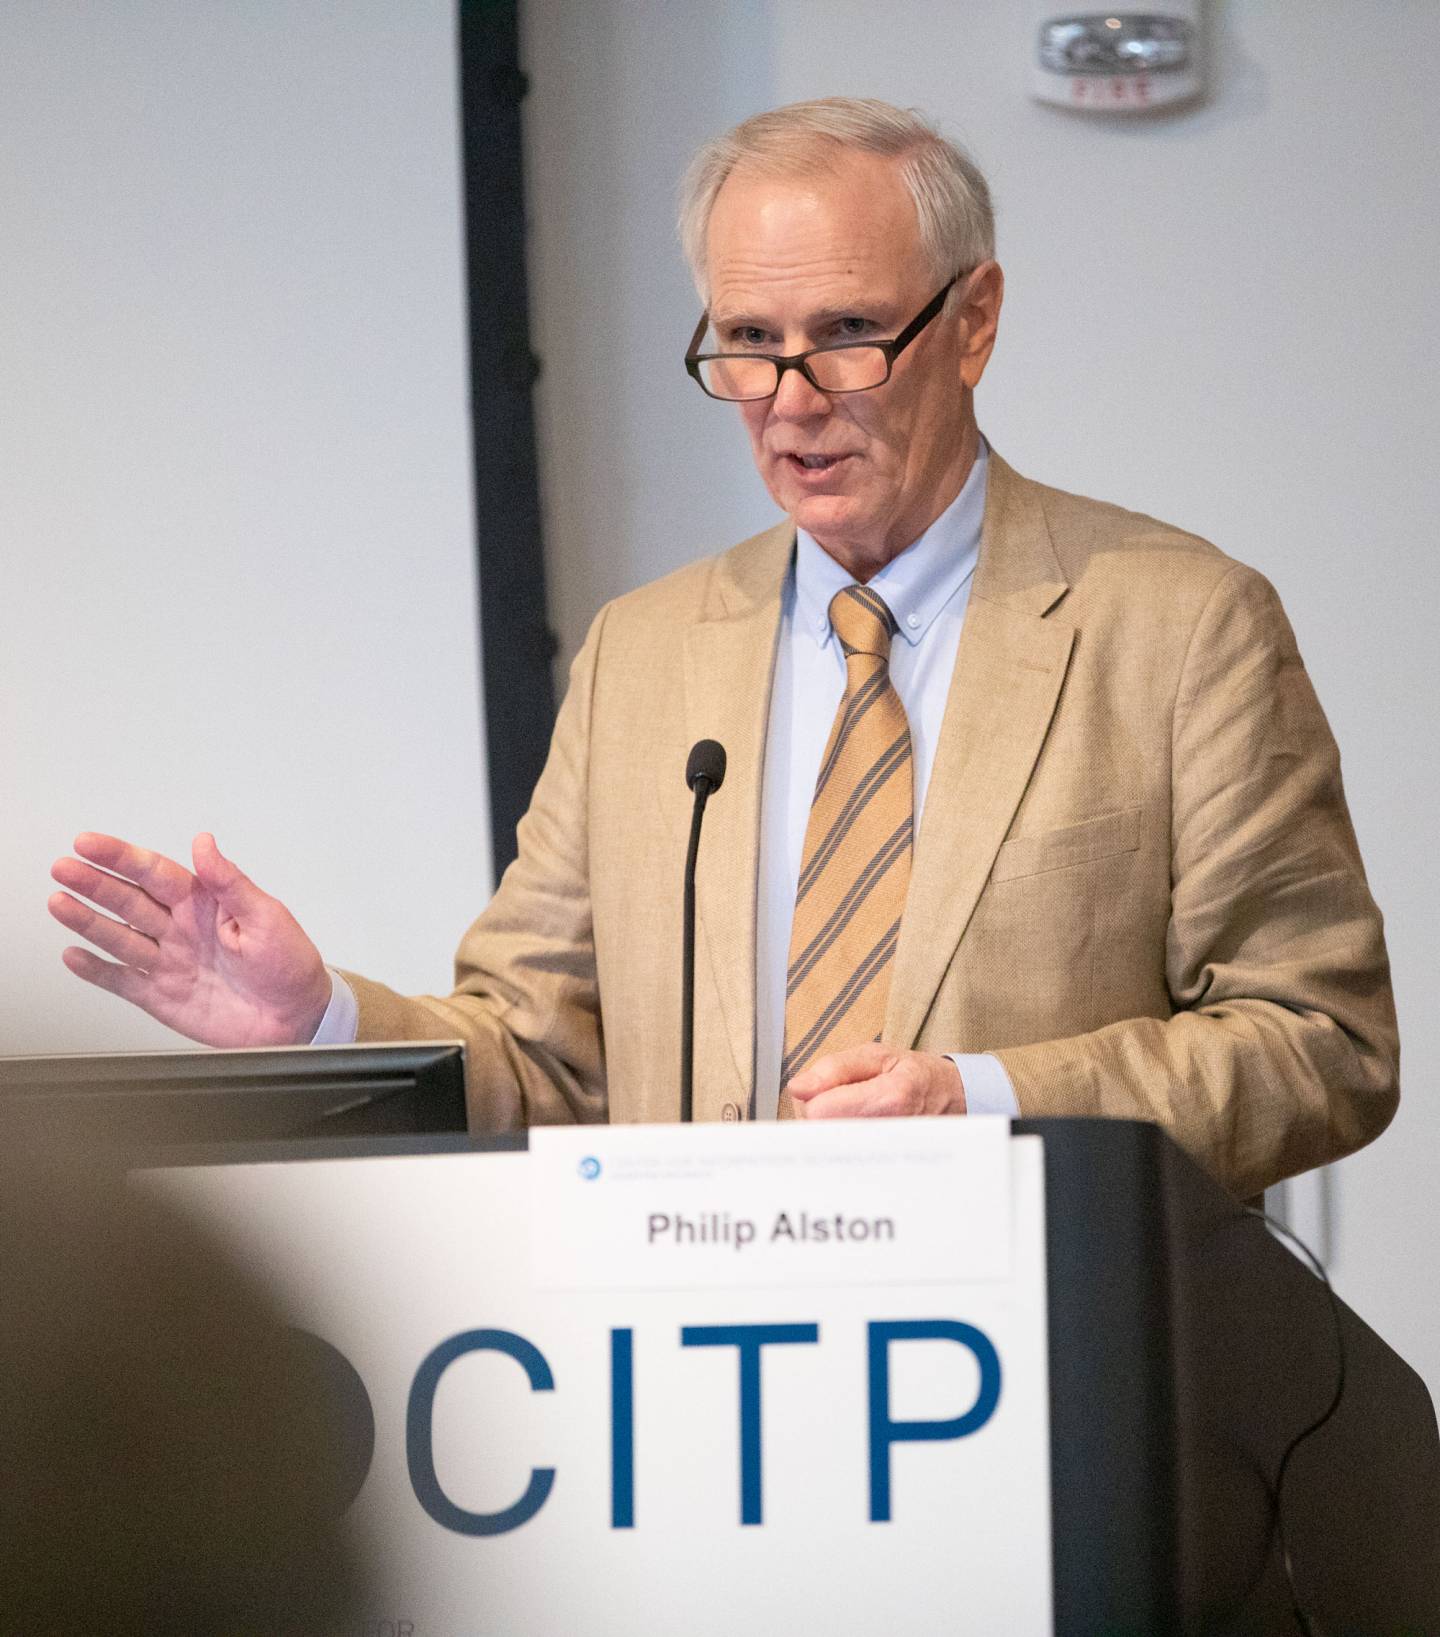 Philip Alston speaking at a podium with the CITP logo on it